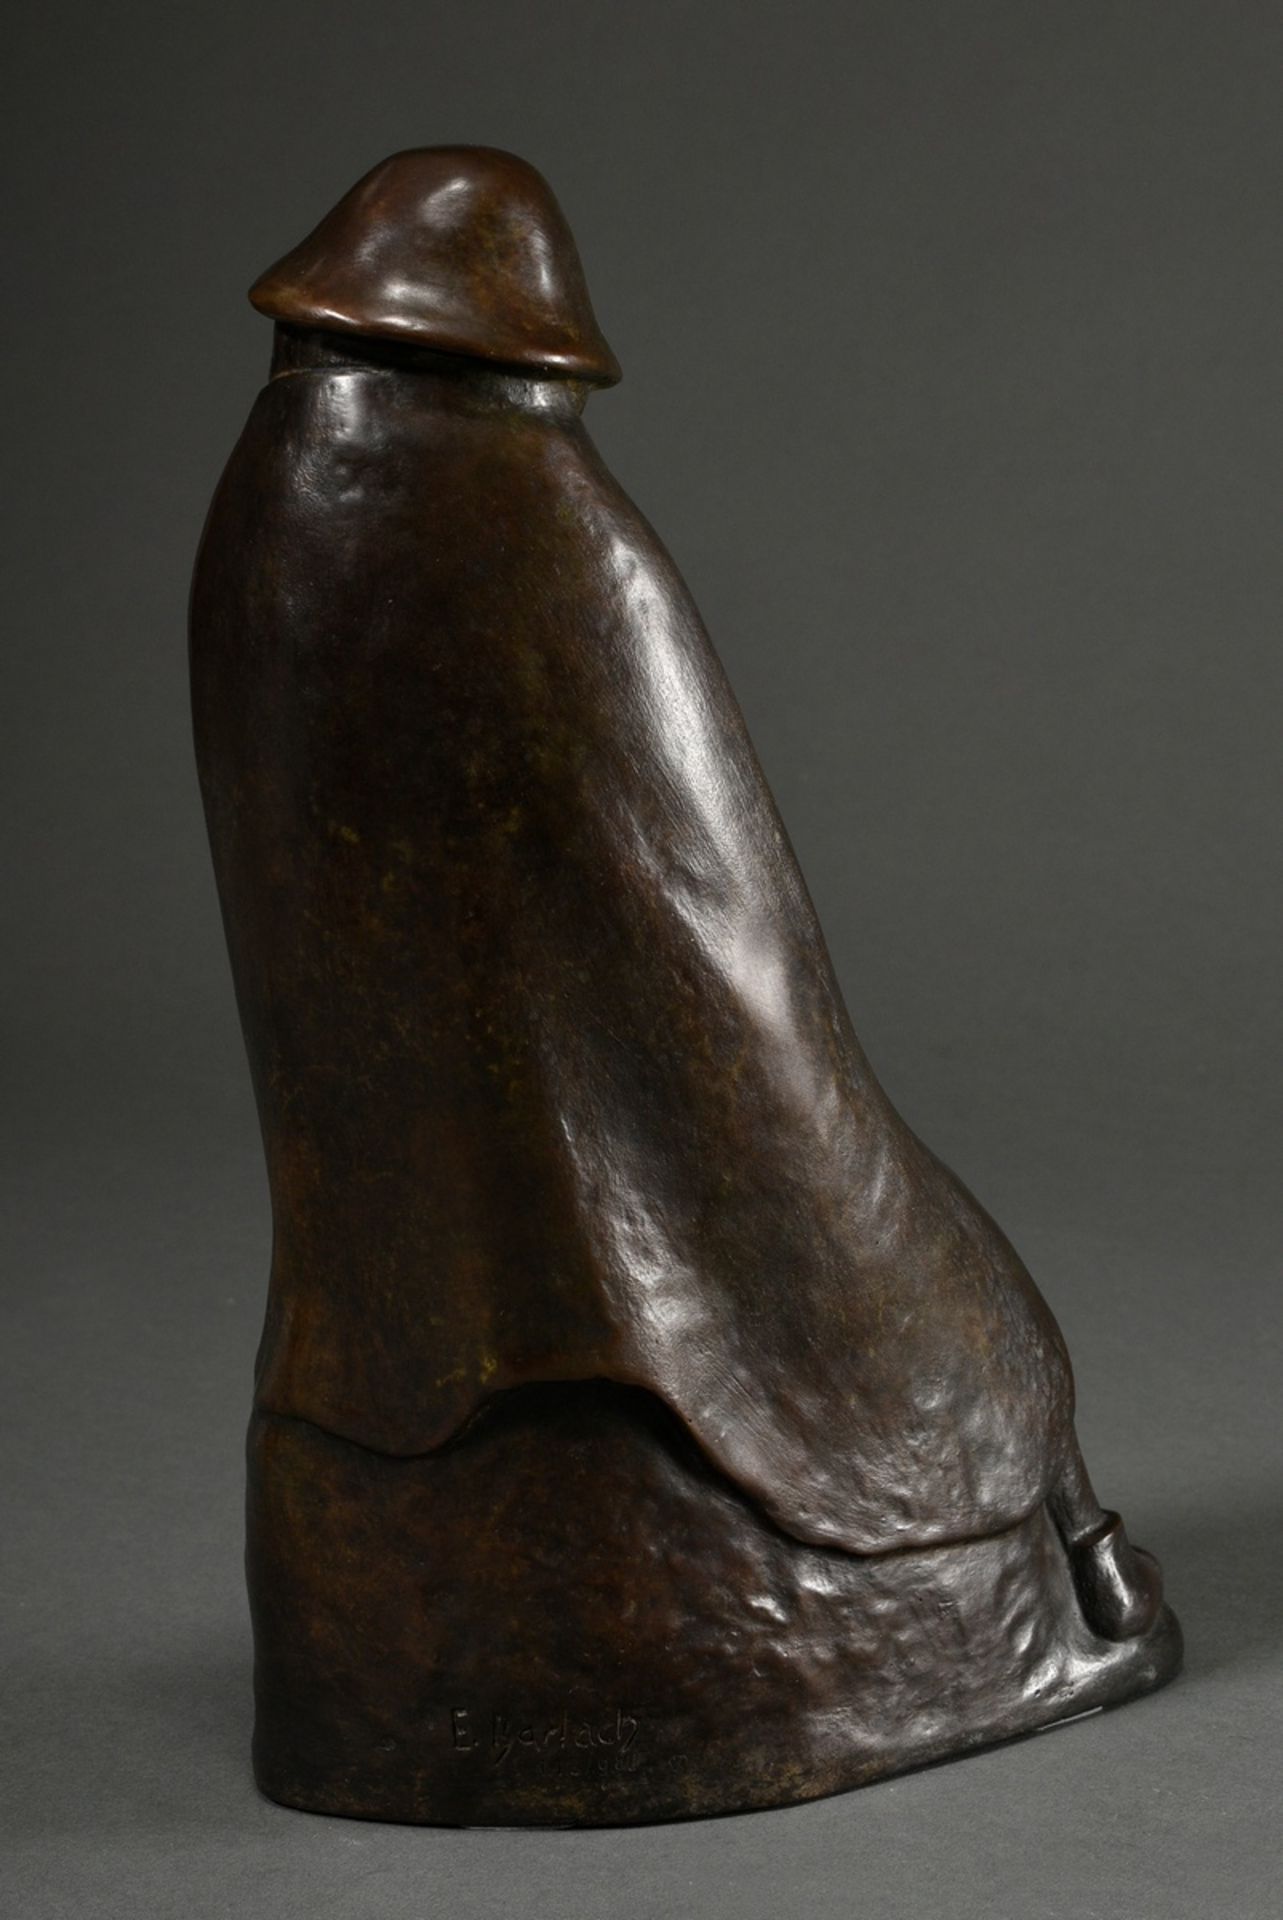 Barlach, Ernst (1870-1938) "The Flute Player" 1936, patinated bronze, 119/980, b. sign/num., posthu - Image 3 of 6